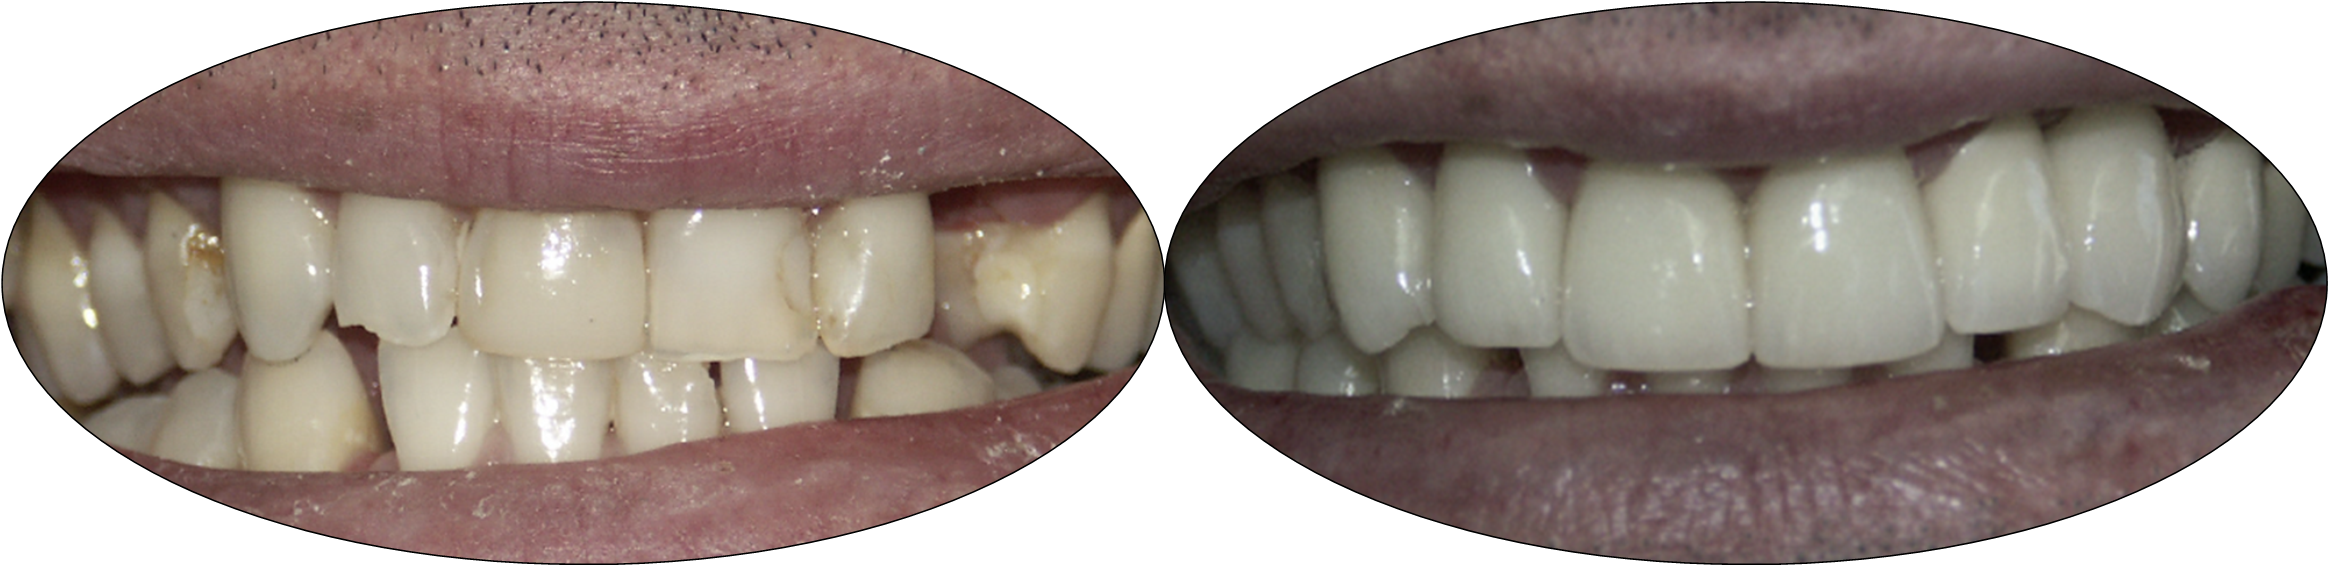 Before and after smile photos of patient with porcelain crowns